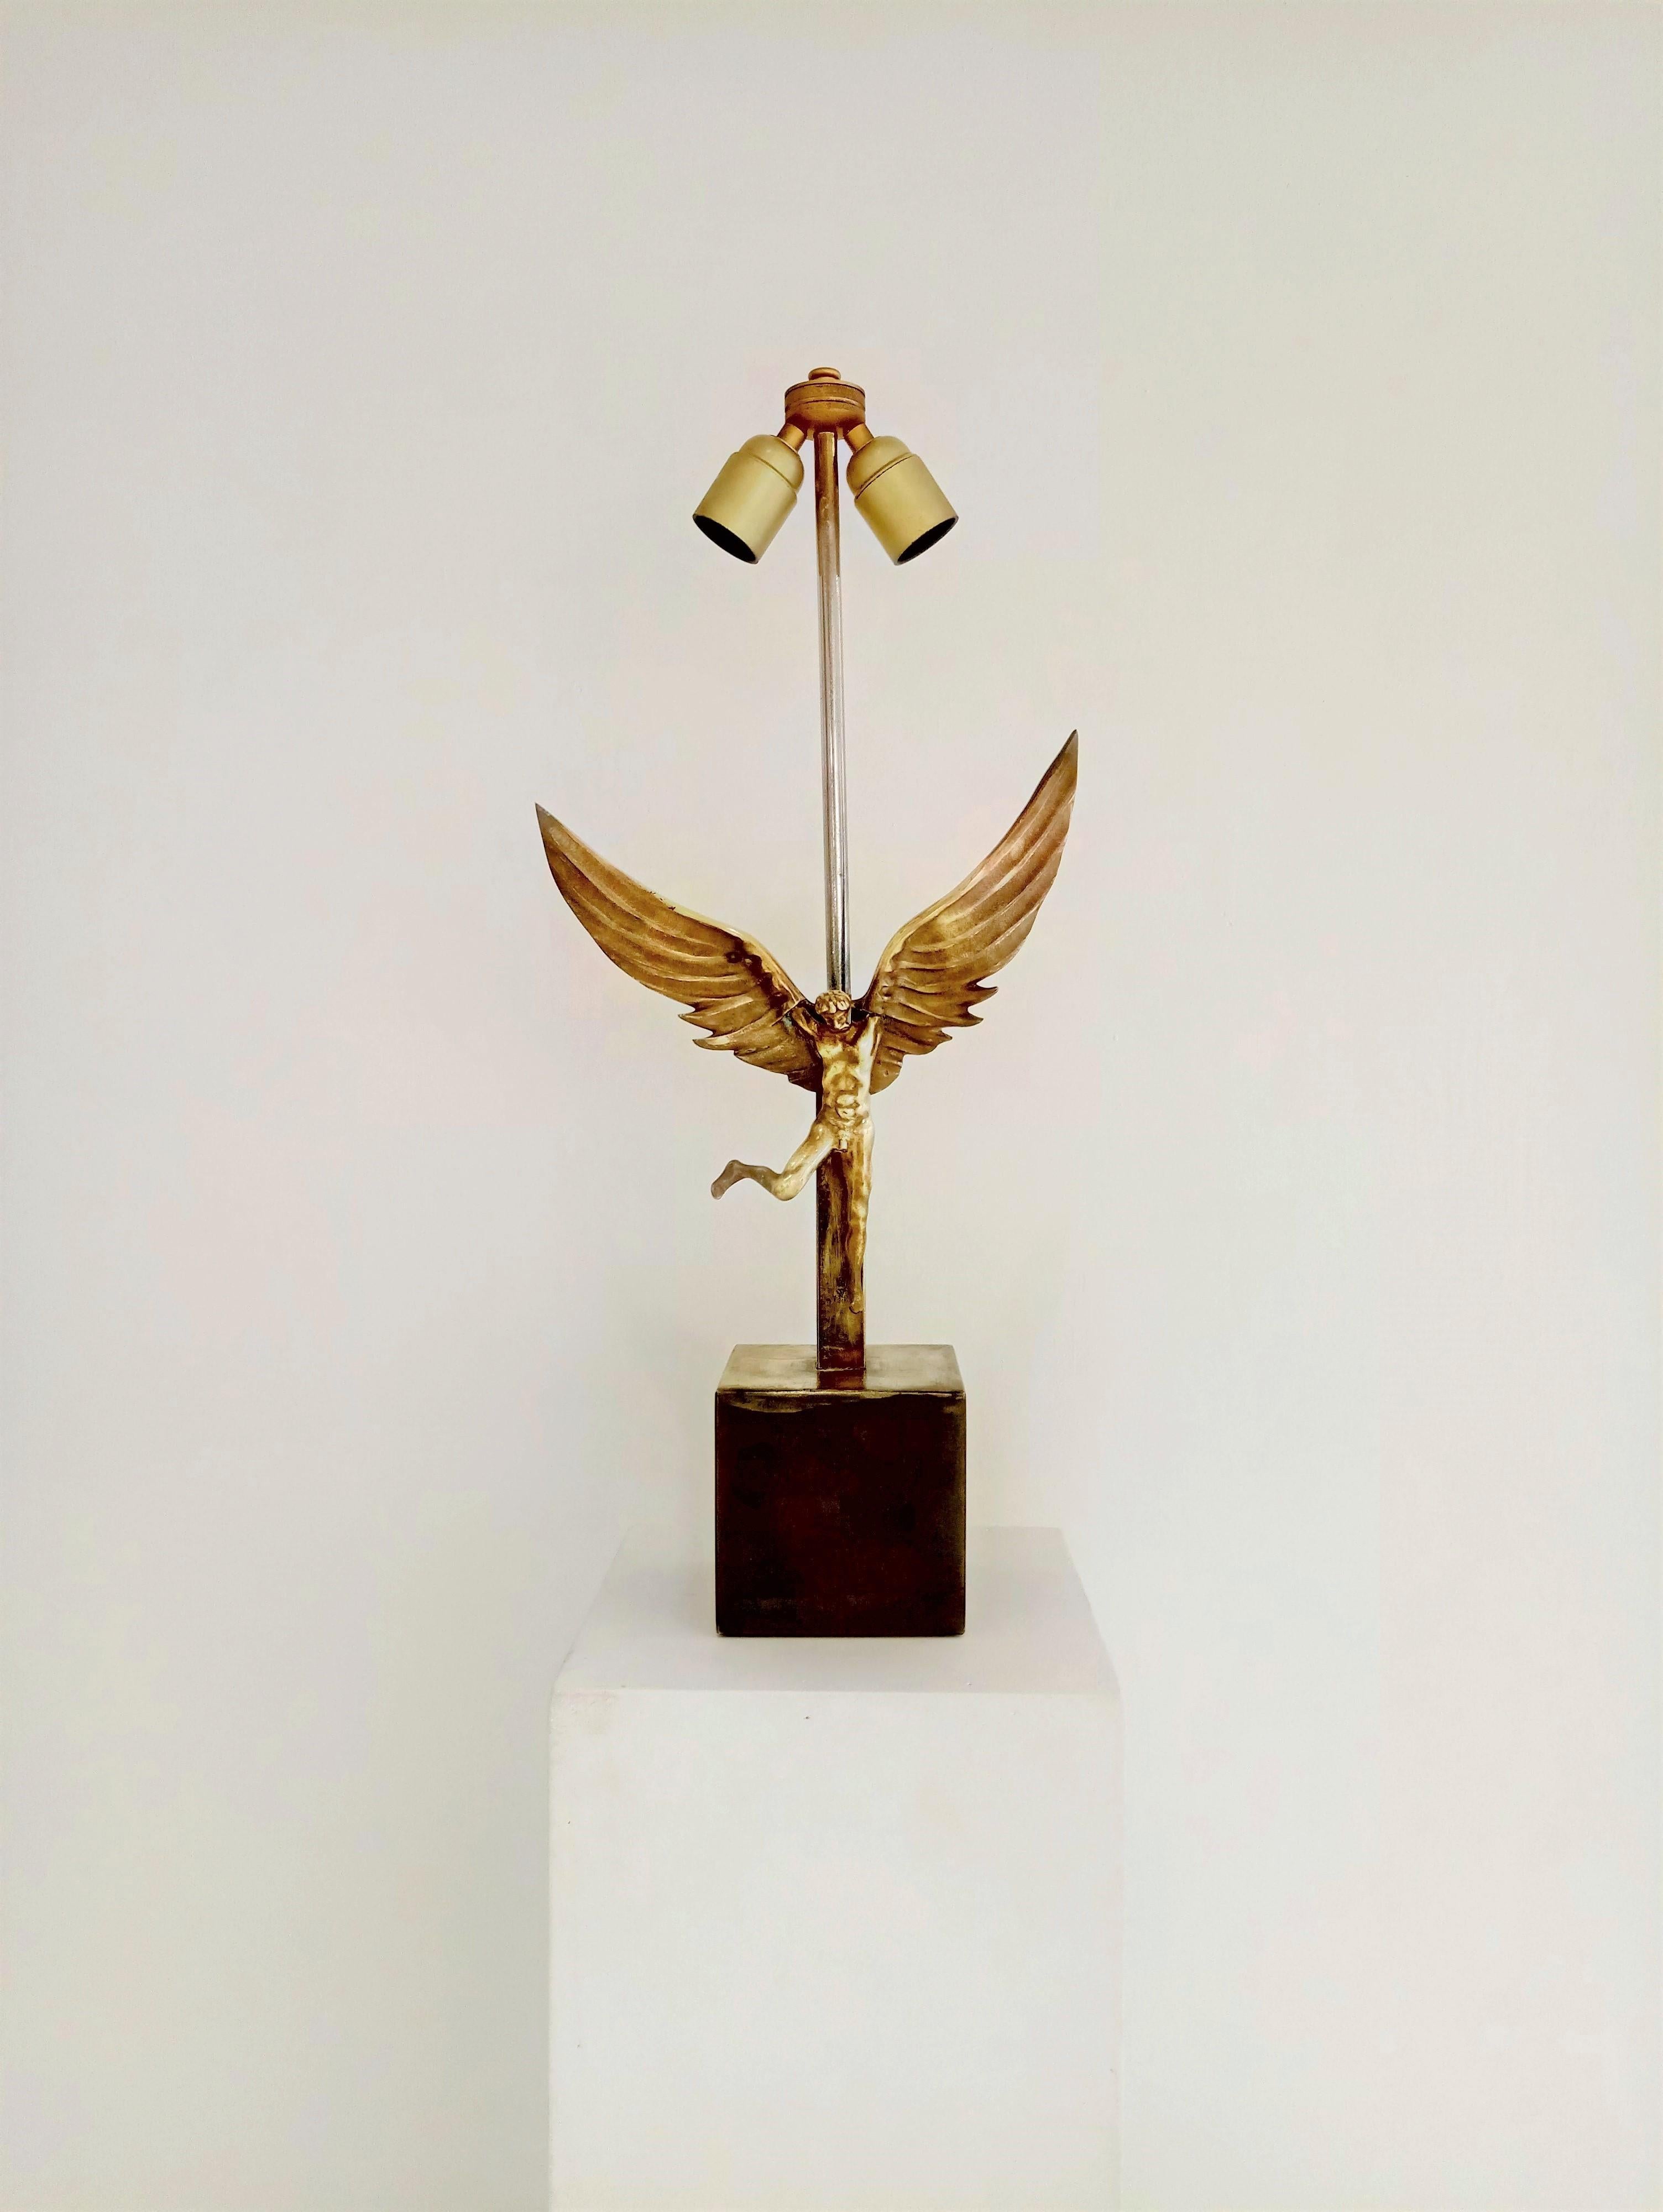 Rare solid bronze table lamp - sculpture by Monique Gerber - Art du bronze
signed on the back
European wire and socket.